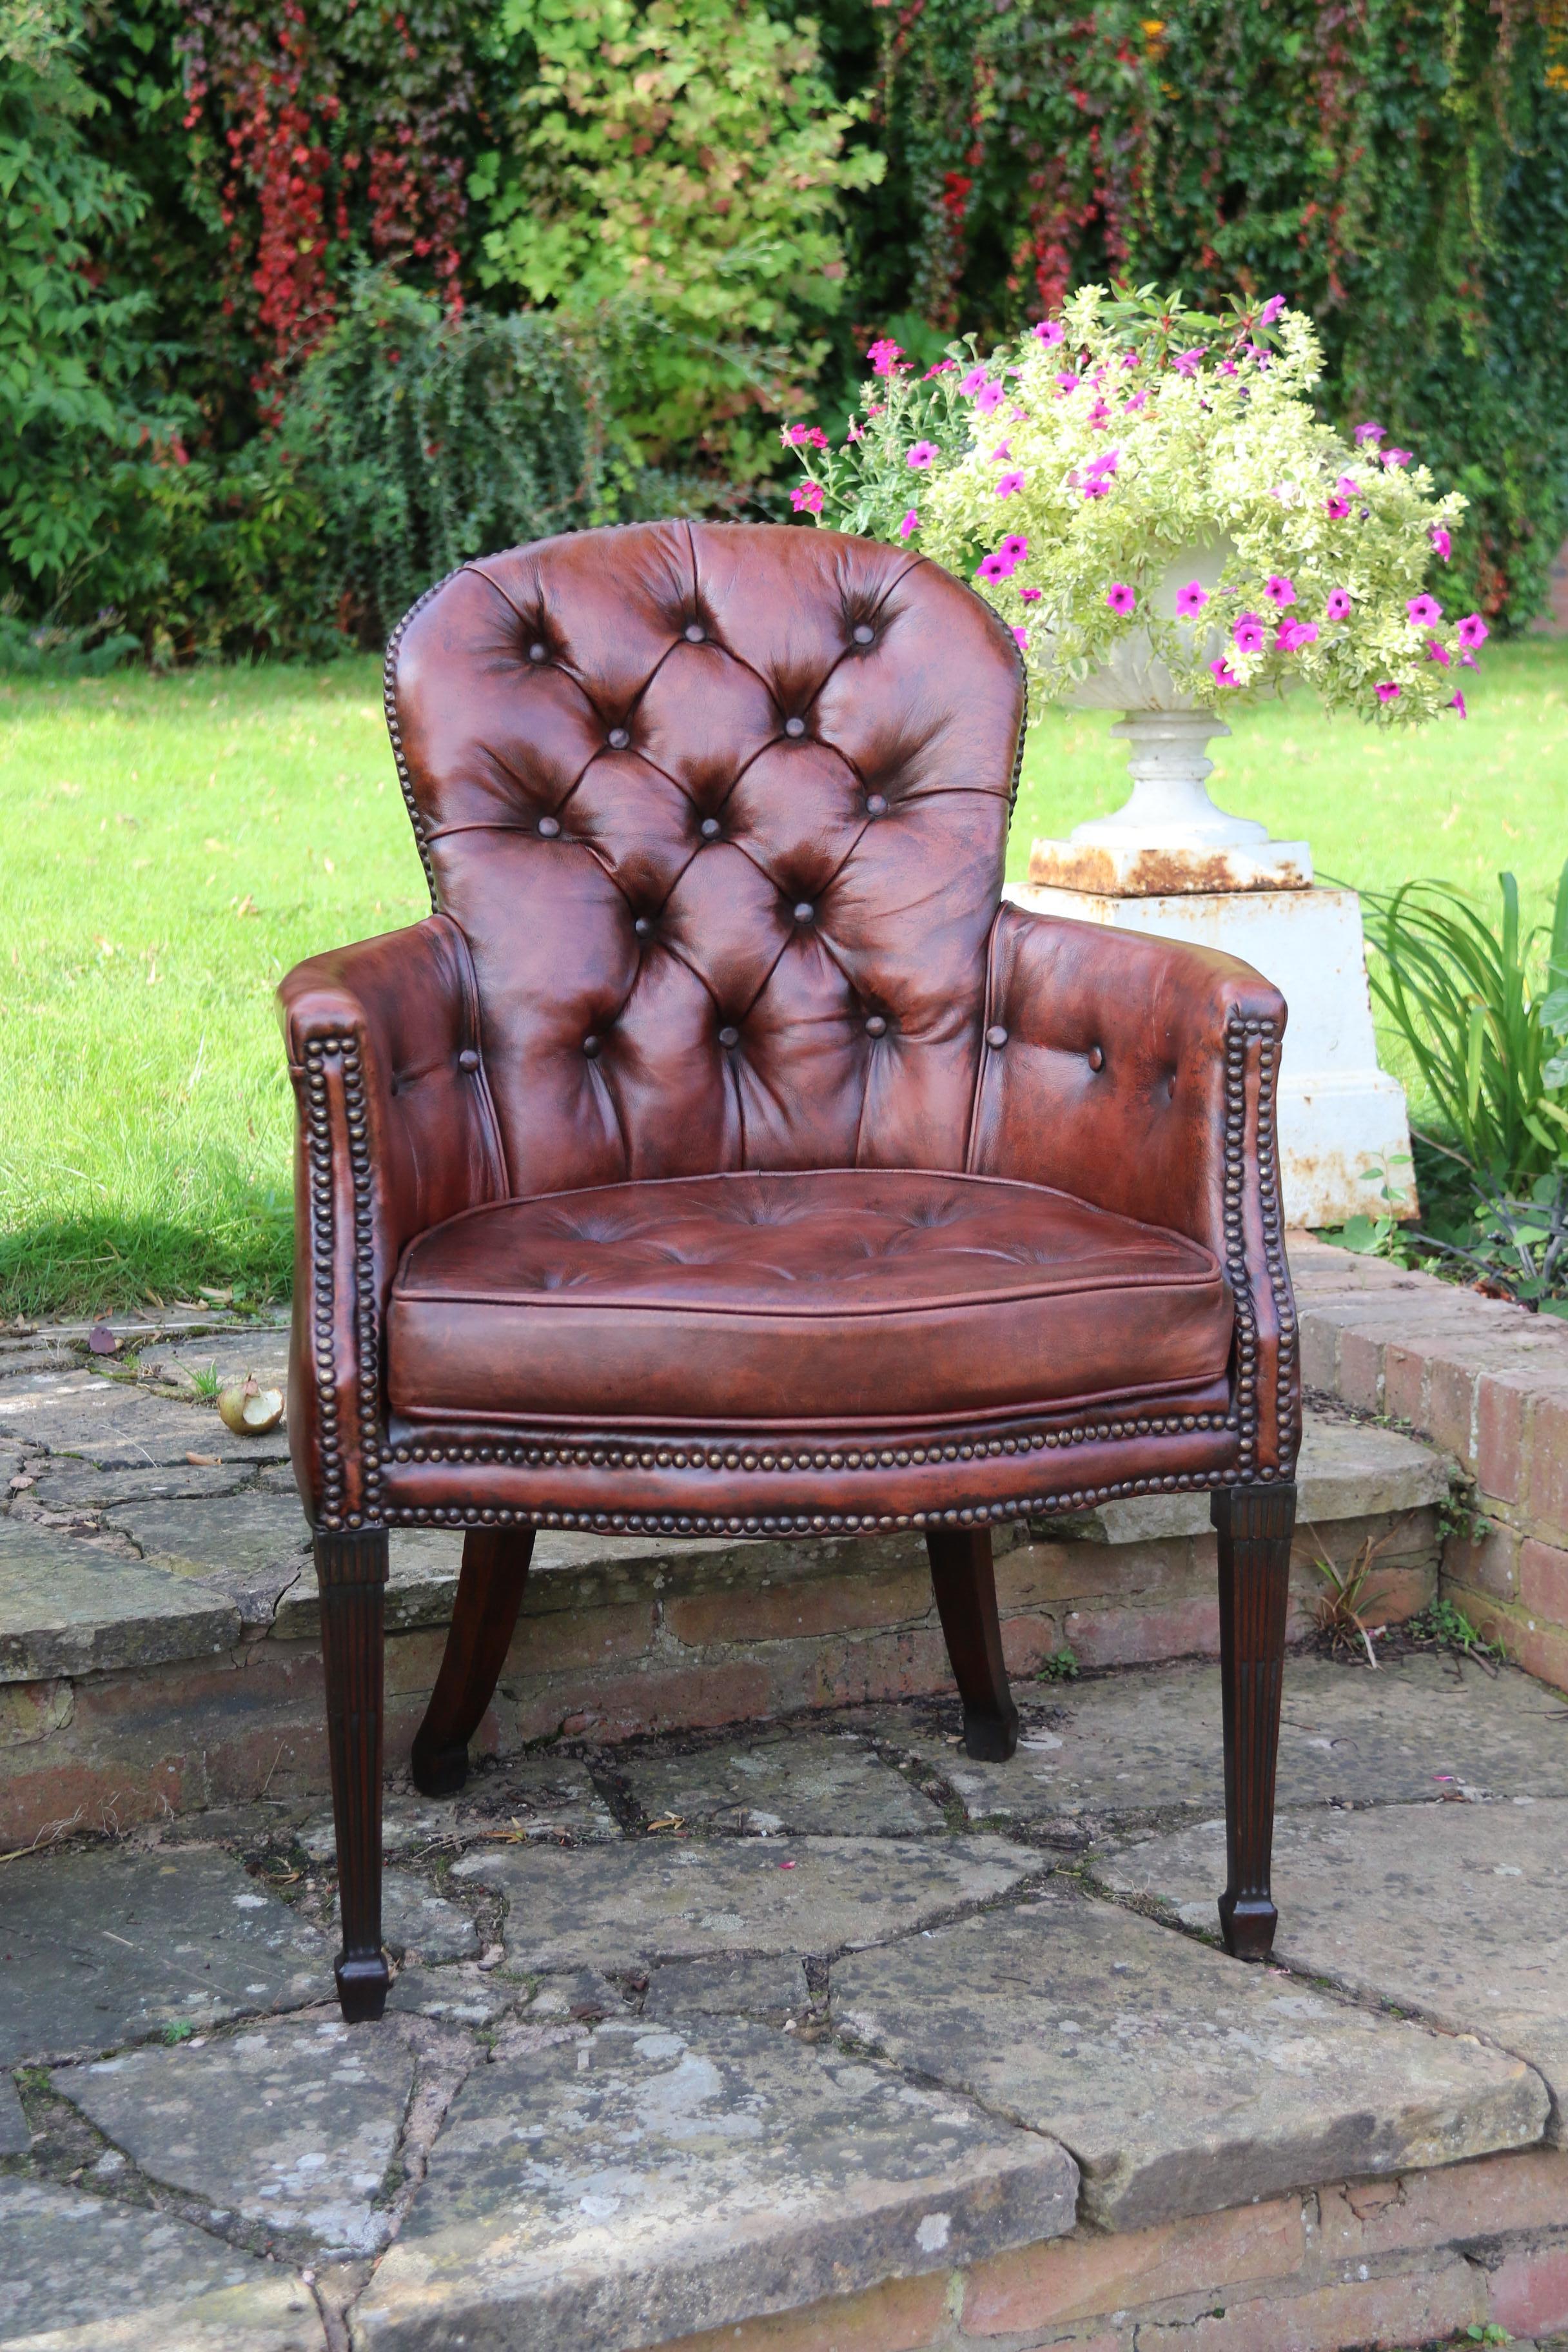 This very stylish rare armchair dates to the late 18th century. It stands on square tapered front legs with spade feet which are decorated with carved fluting and reeding. The rear ones have a similar square form with a generous and elegant back